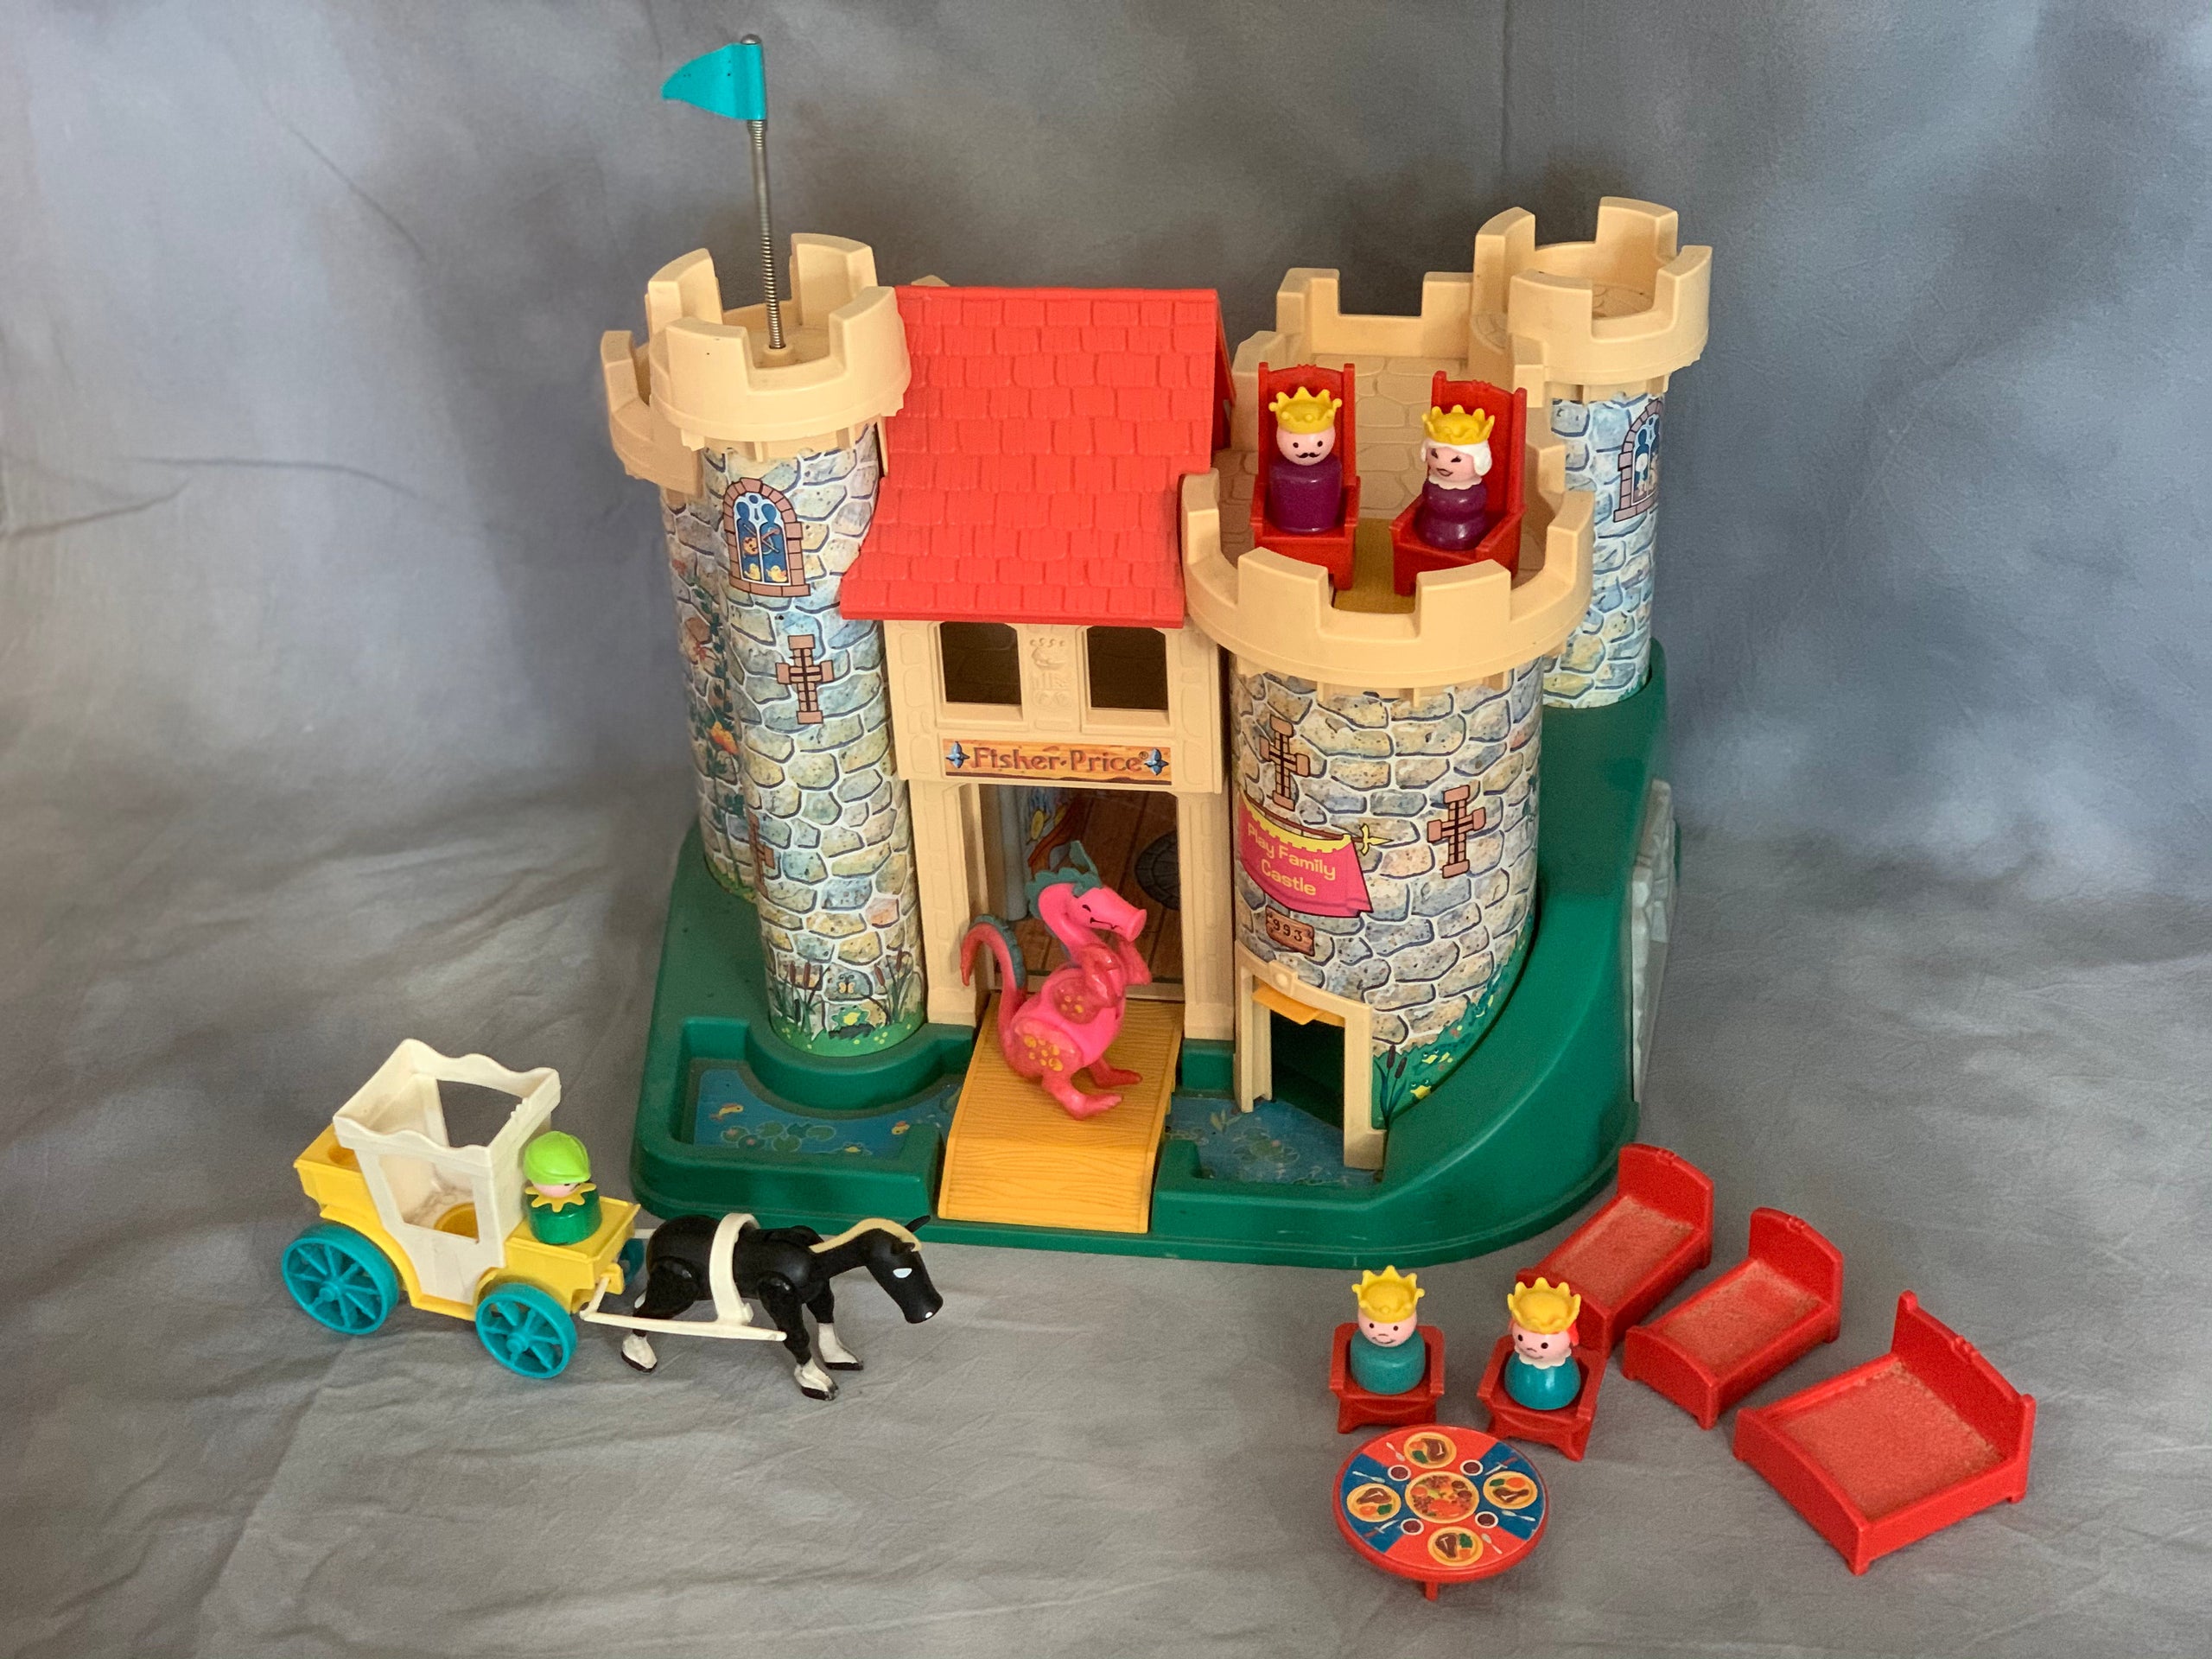 Details about   Fisher-Price Play Family Castle Complete Little People & Accessories 993 Vintage 